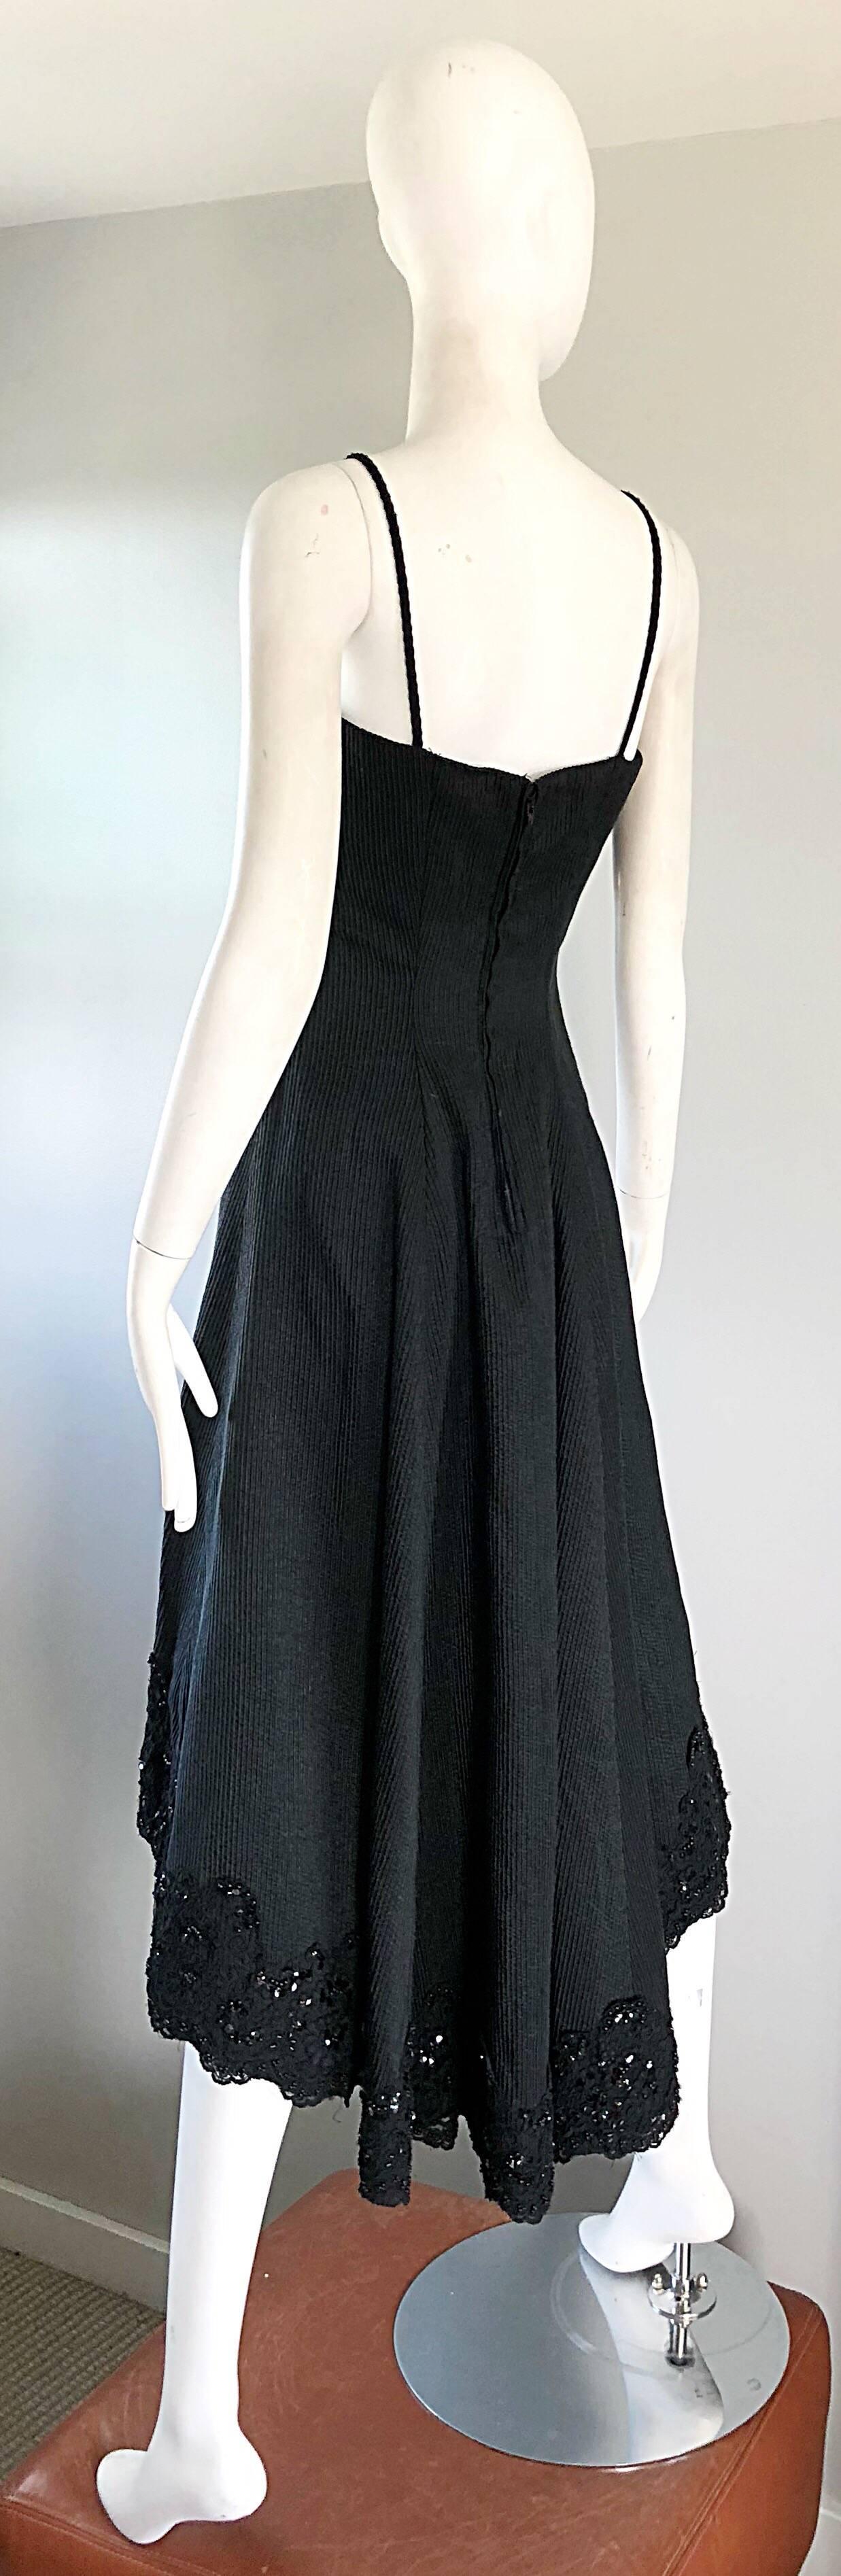 1990s Couture Black Silk Hi - Lo Beaded Sleeveless 50s Style Cocktail Dress For Sale 4